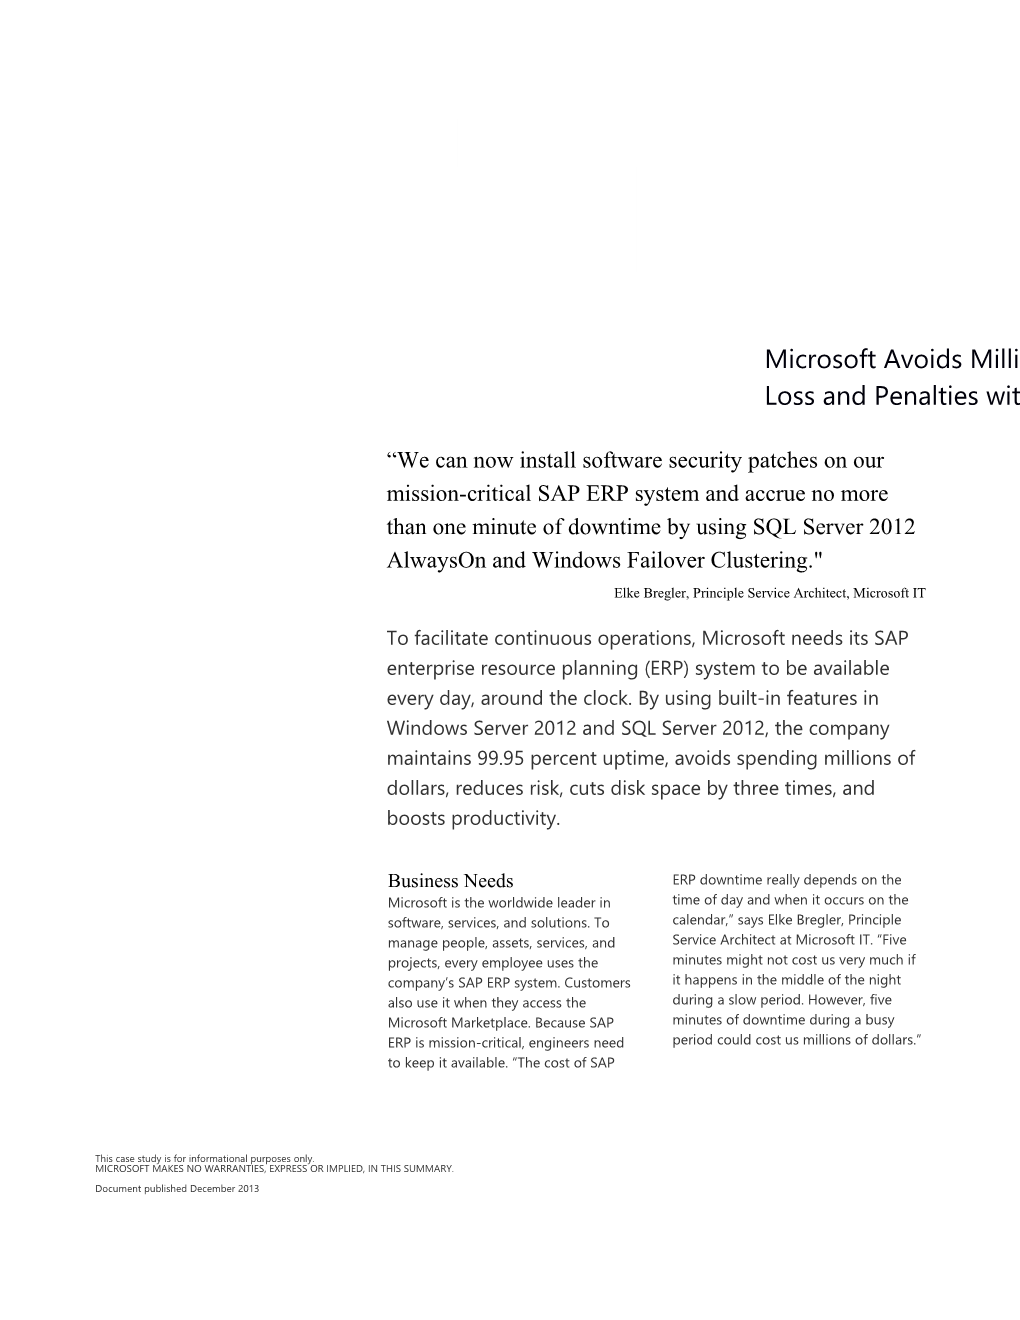 Microsoft Avoids Millions of Dollars in Revenue Loss and Penalties with 99.95 Percent SAP Uptime